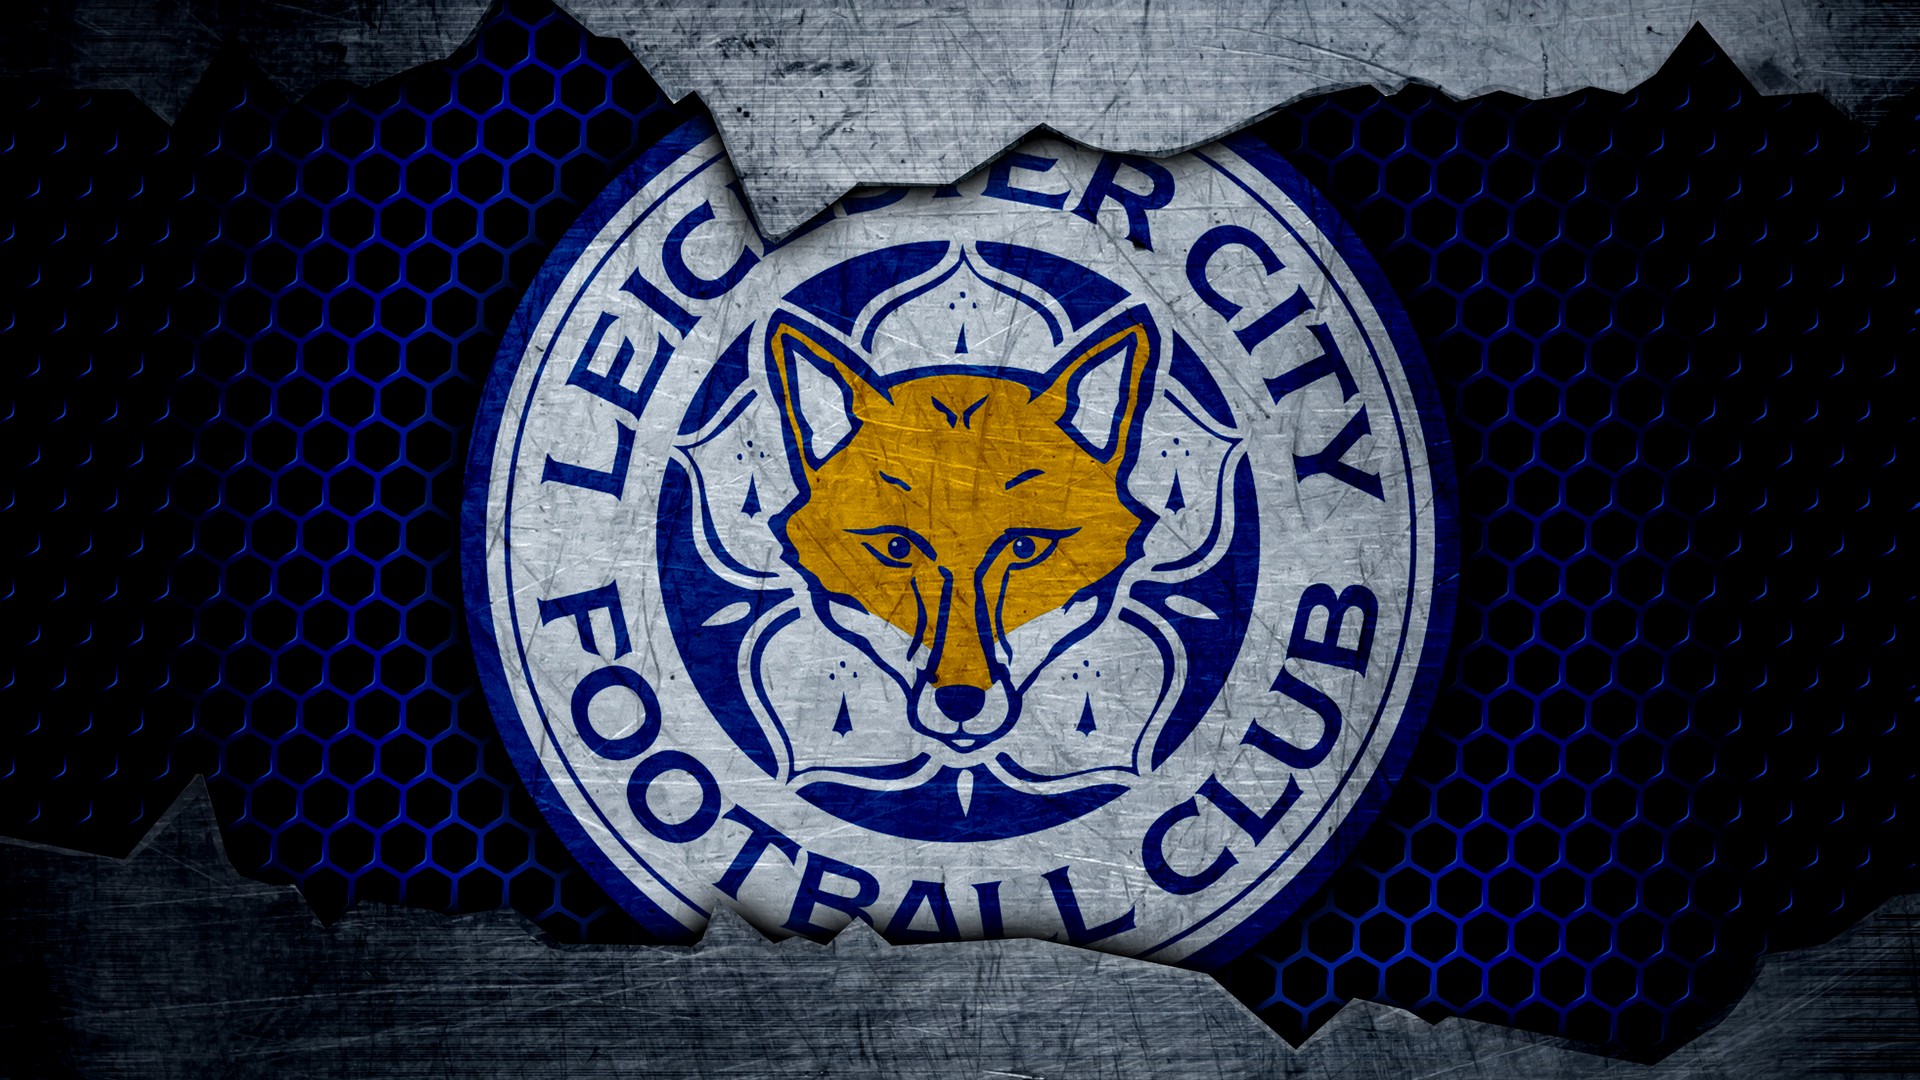 Wallpaper Desktop Leicester City HD With high-resolution 1920X1080 pixel. You can use this wallpaper for your Desktop Computers, Mac Screensavers, Windows Backgrounds, iPhone Wallpapers, Tablet or Android Lock screen and another Mobile device